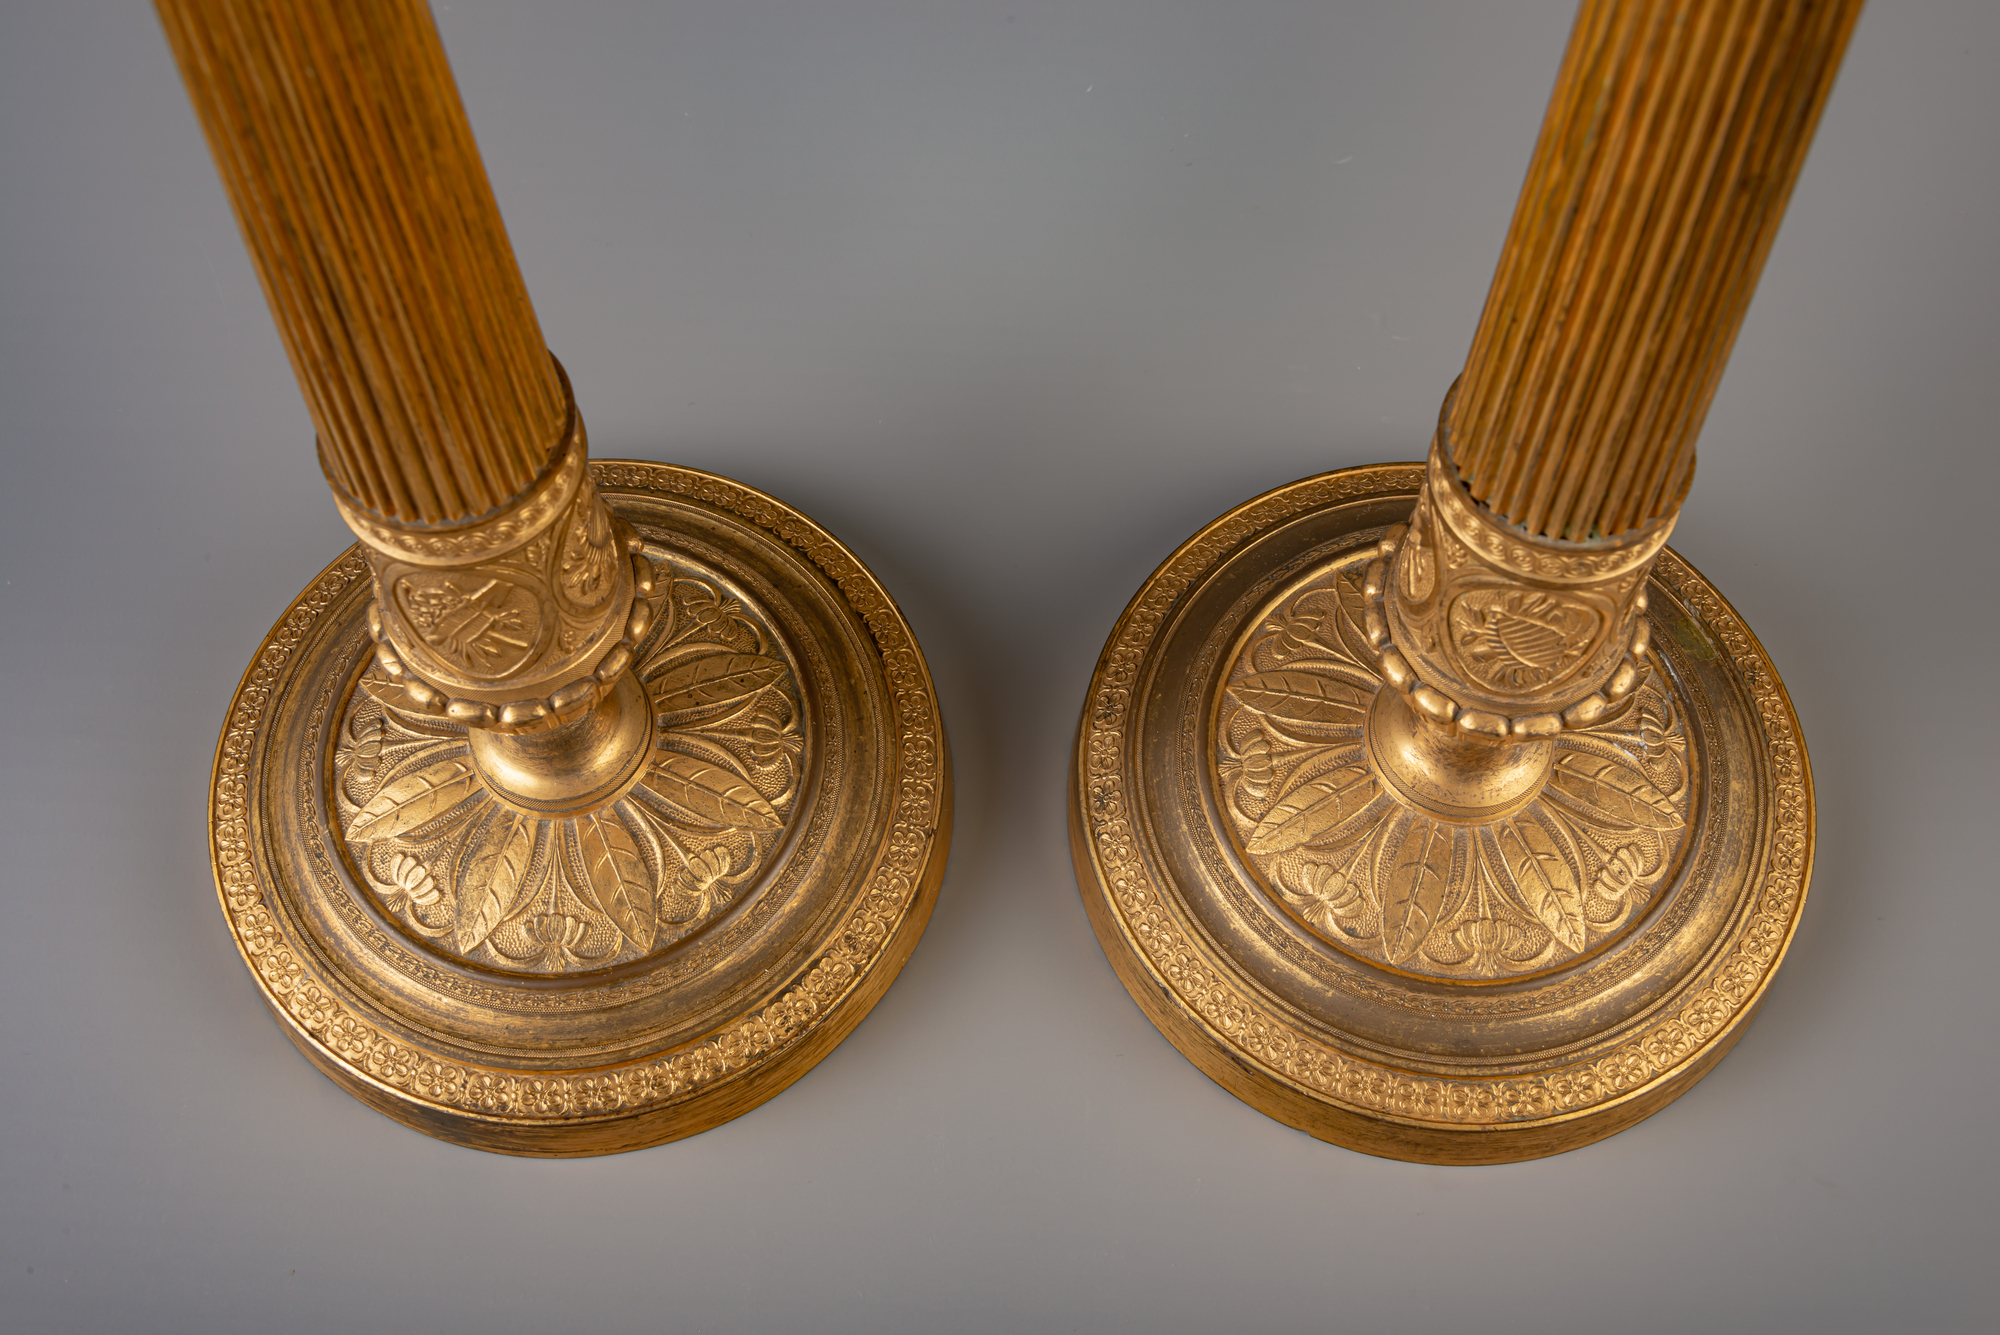 A pair of French Neoclassical gilt bronze candlesticks, 19th C. - Image 7 of 7